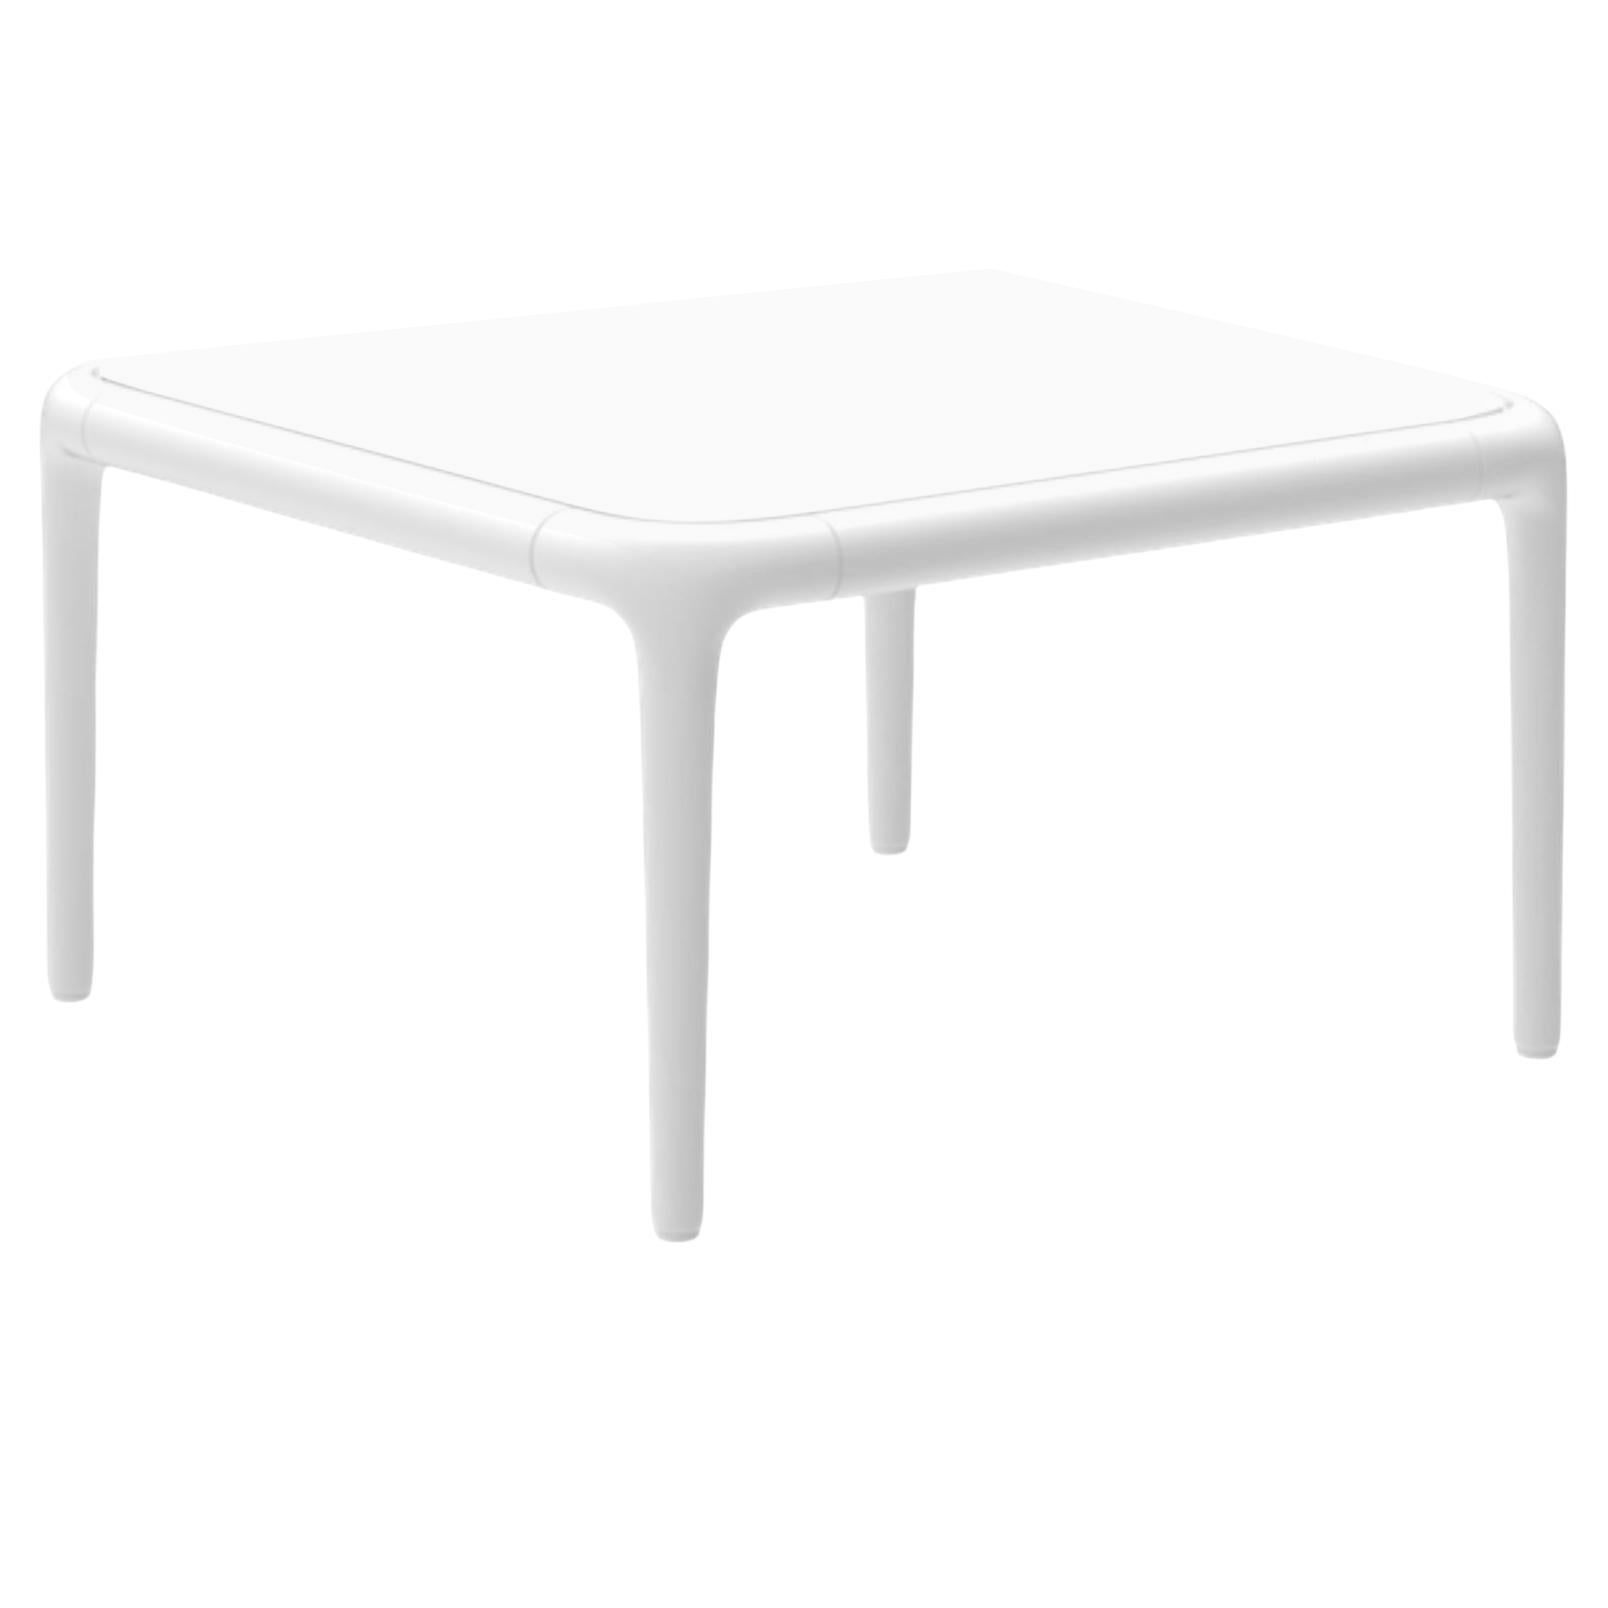 Xaloc White Coffee Table 50 with Glass Top by Mowee